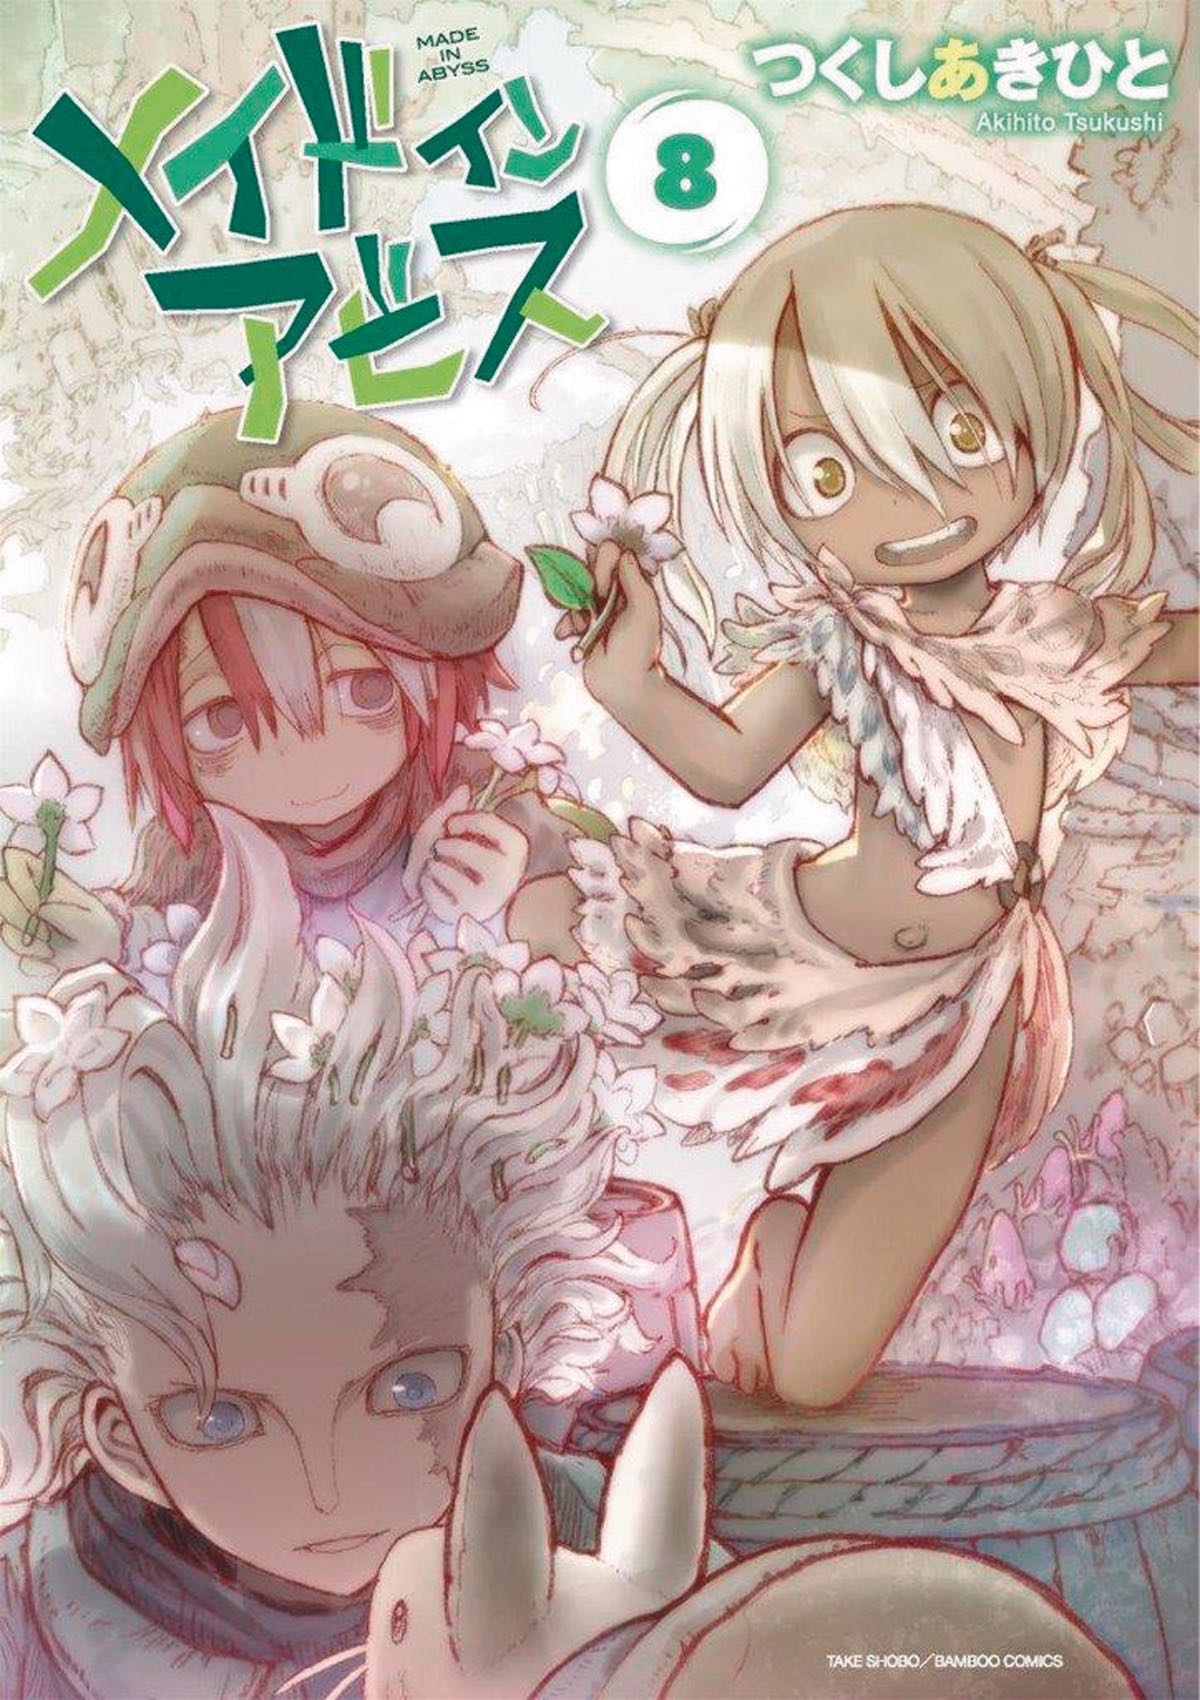 Made in the Abyss Vol. 8 | Fresh Comics